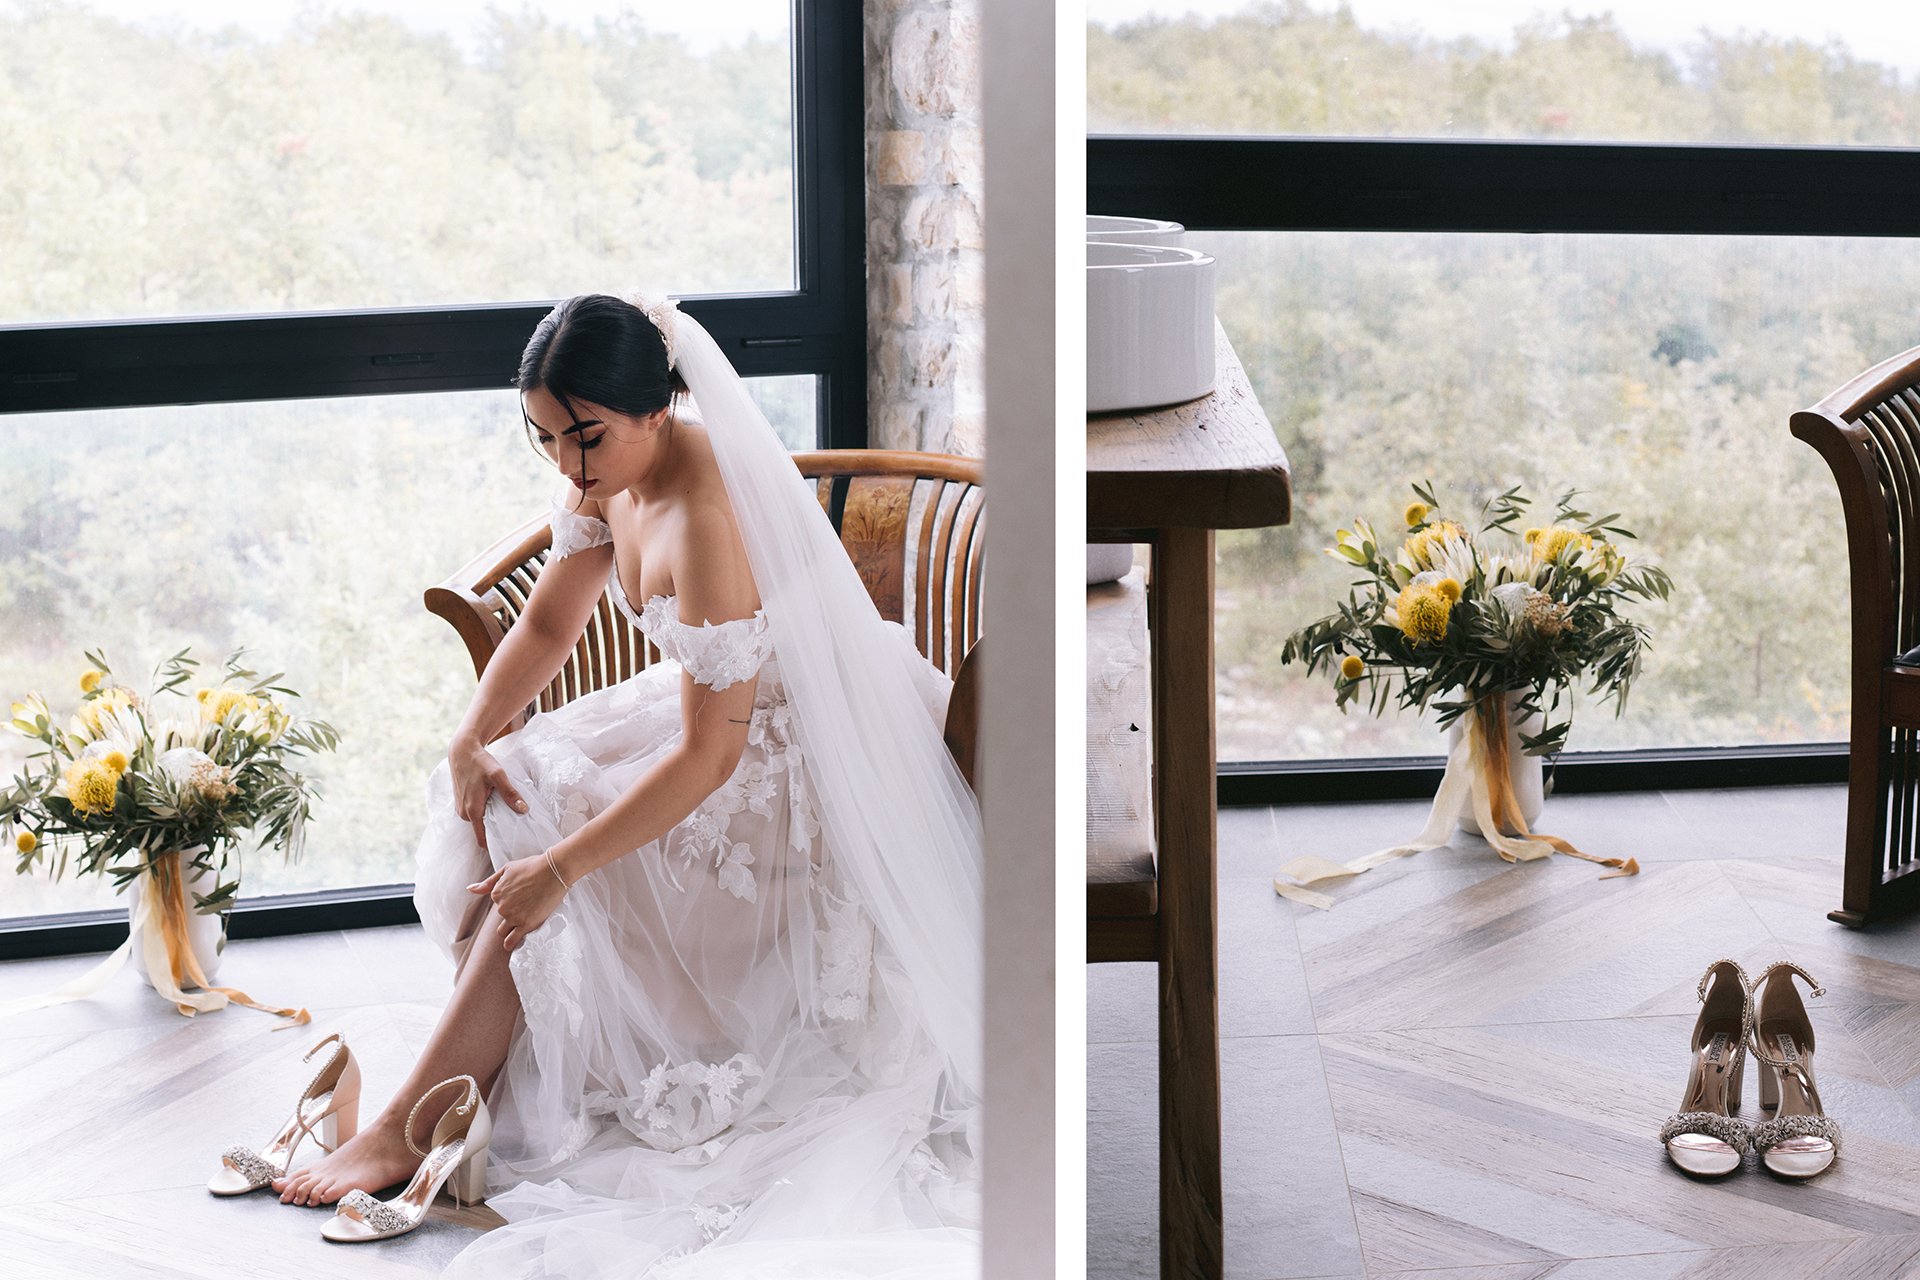 10 items you need in your bridal suite